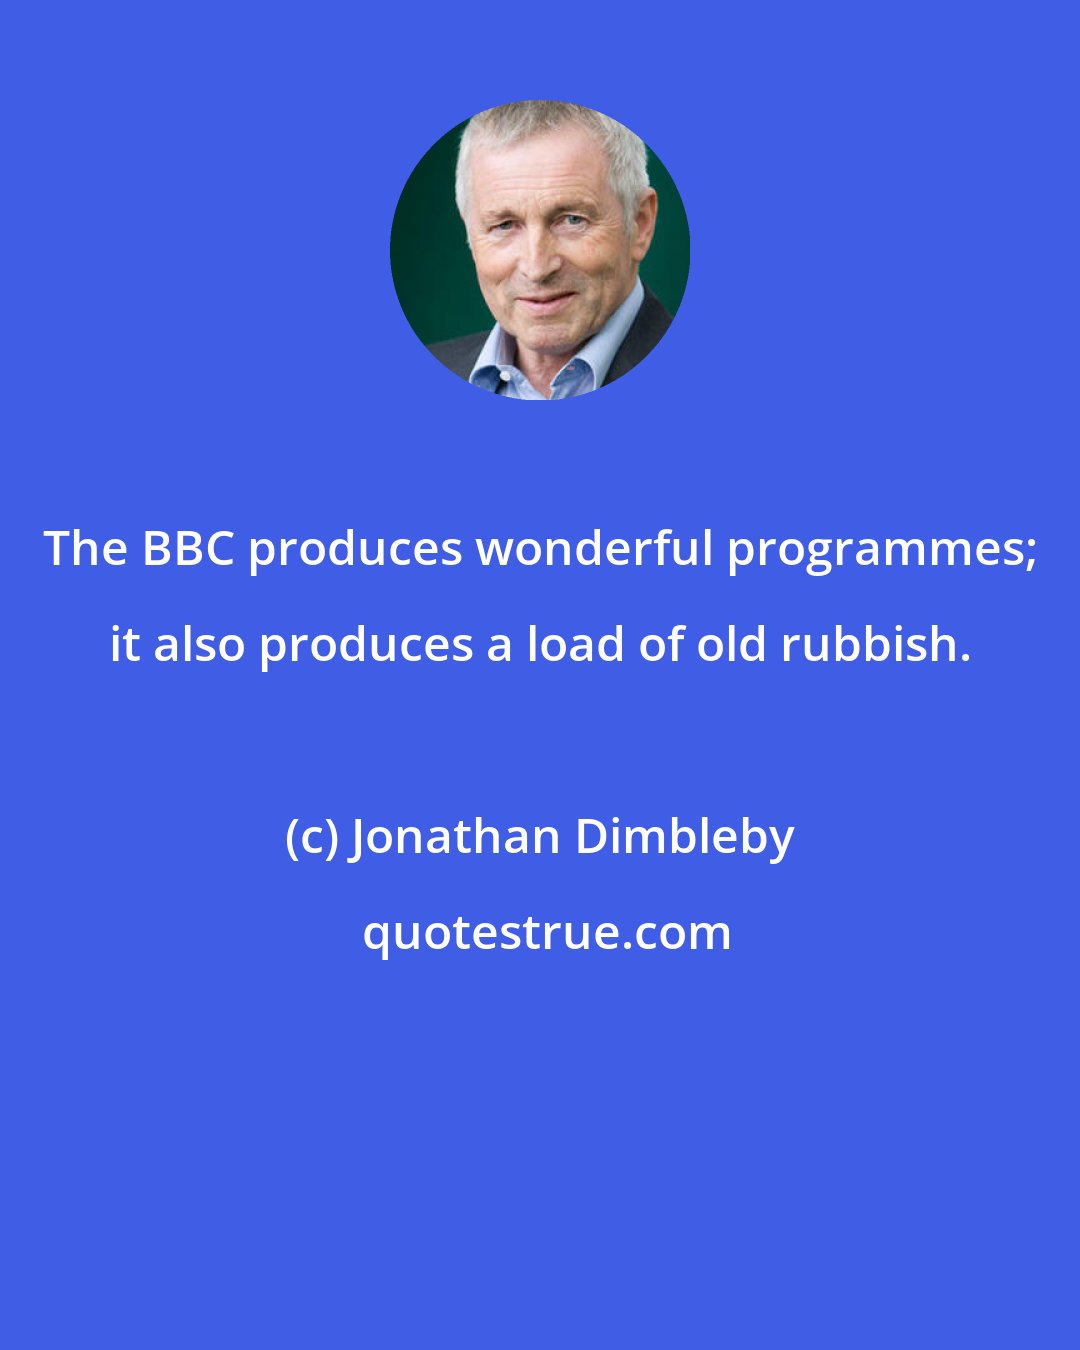 Jonathan Dimbleby: The BBC produces wonderful programmes; it also produces a load of old rubbish.